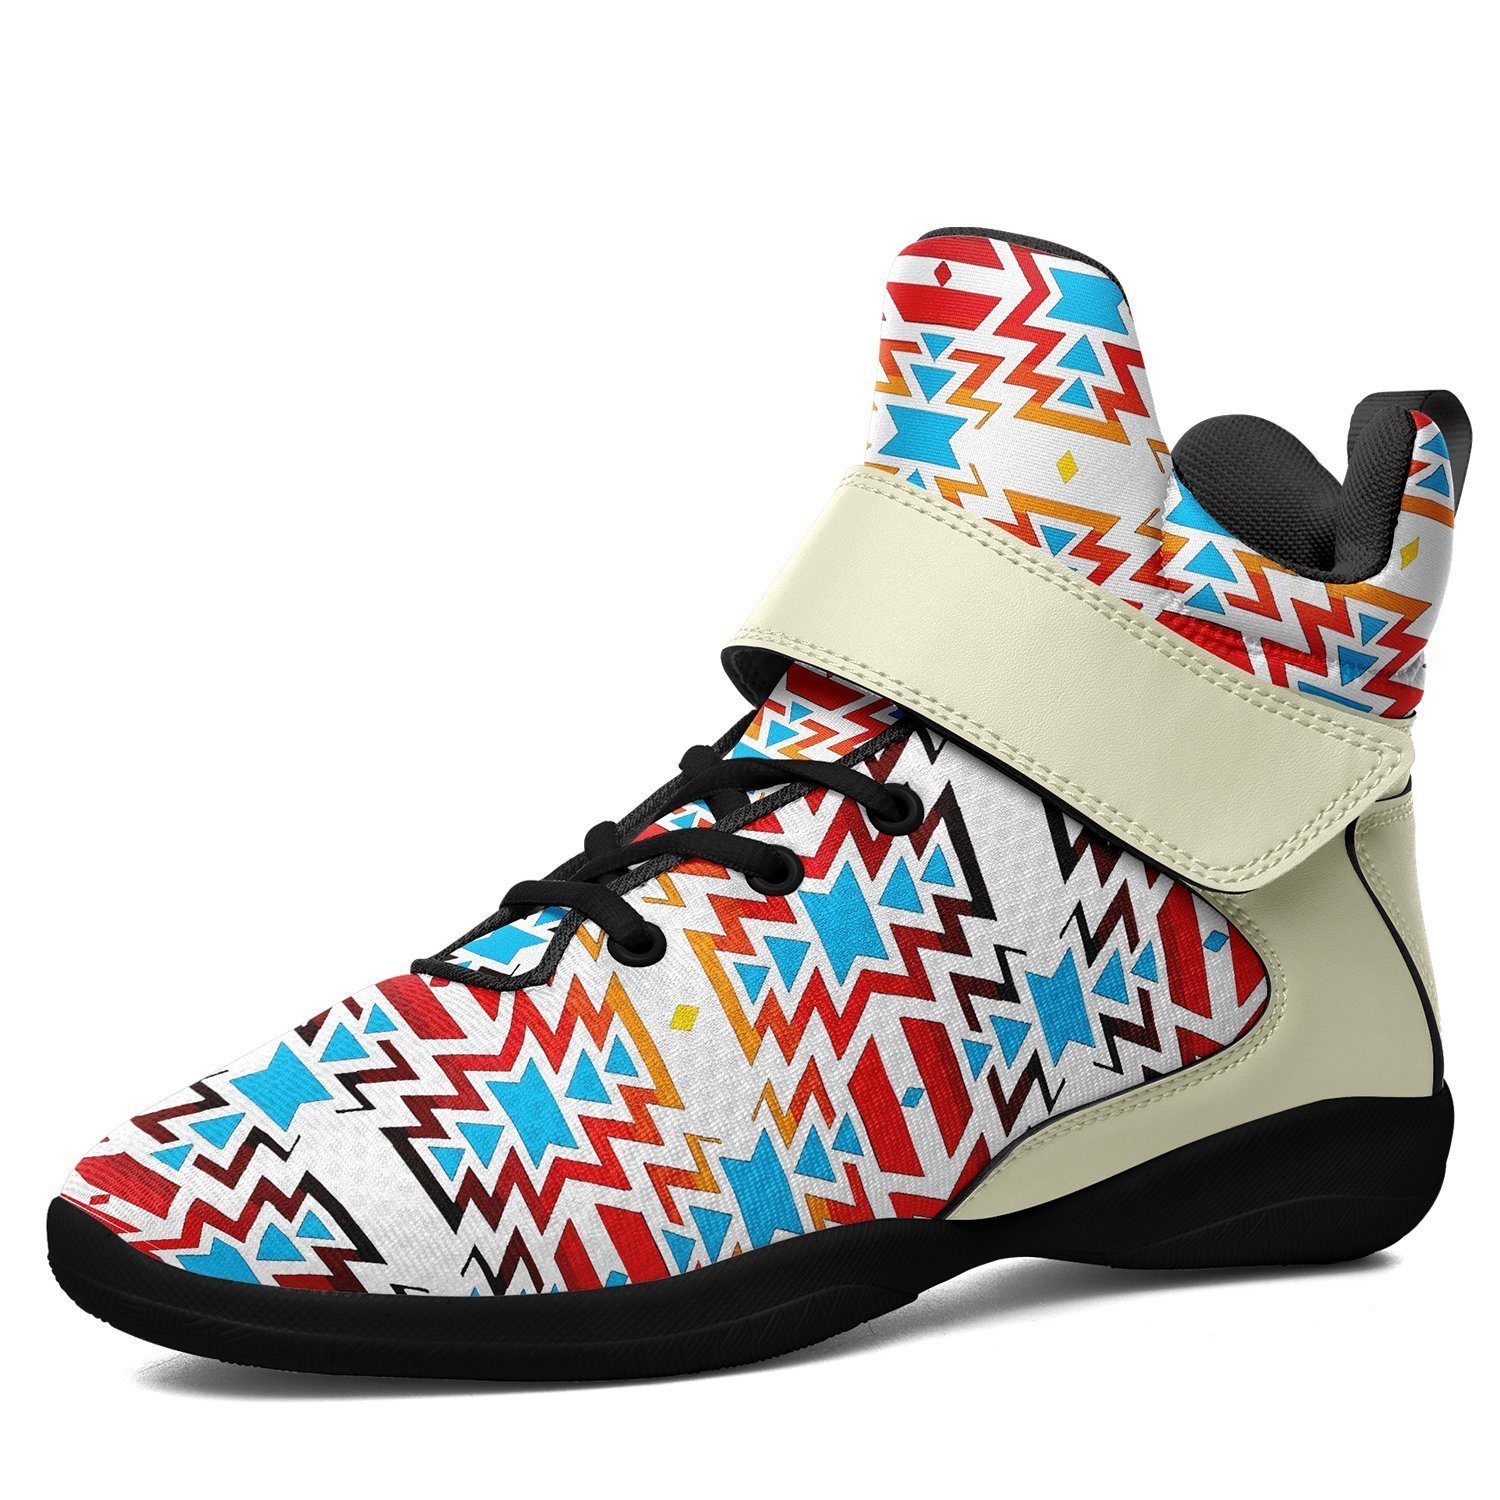 Fire Colors and Sky Ipottaa Basketball / Sport High Top Shoes 49 Dzine US Women 4.5 / US Youth 3.5 / EUR 35 Black Sole with Cream Strap 